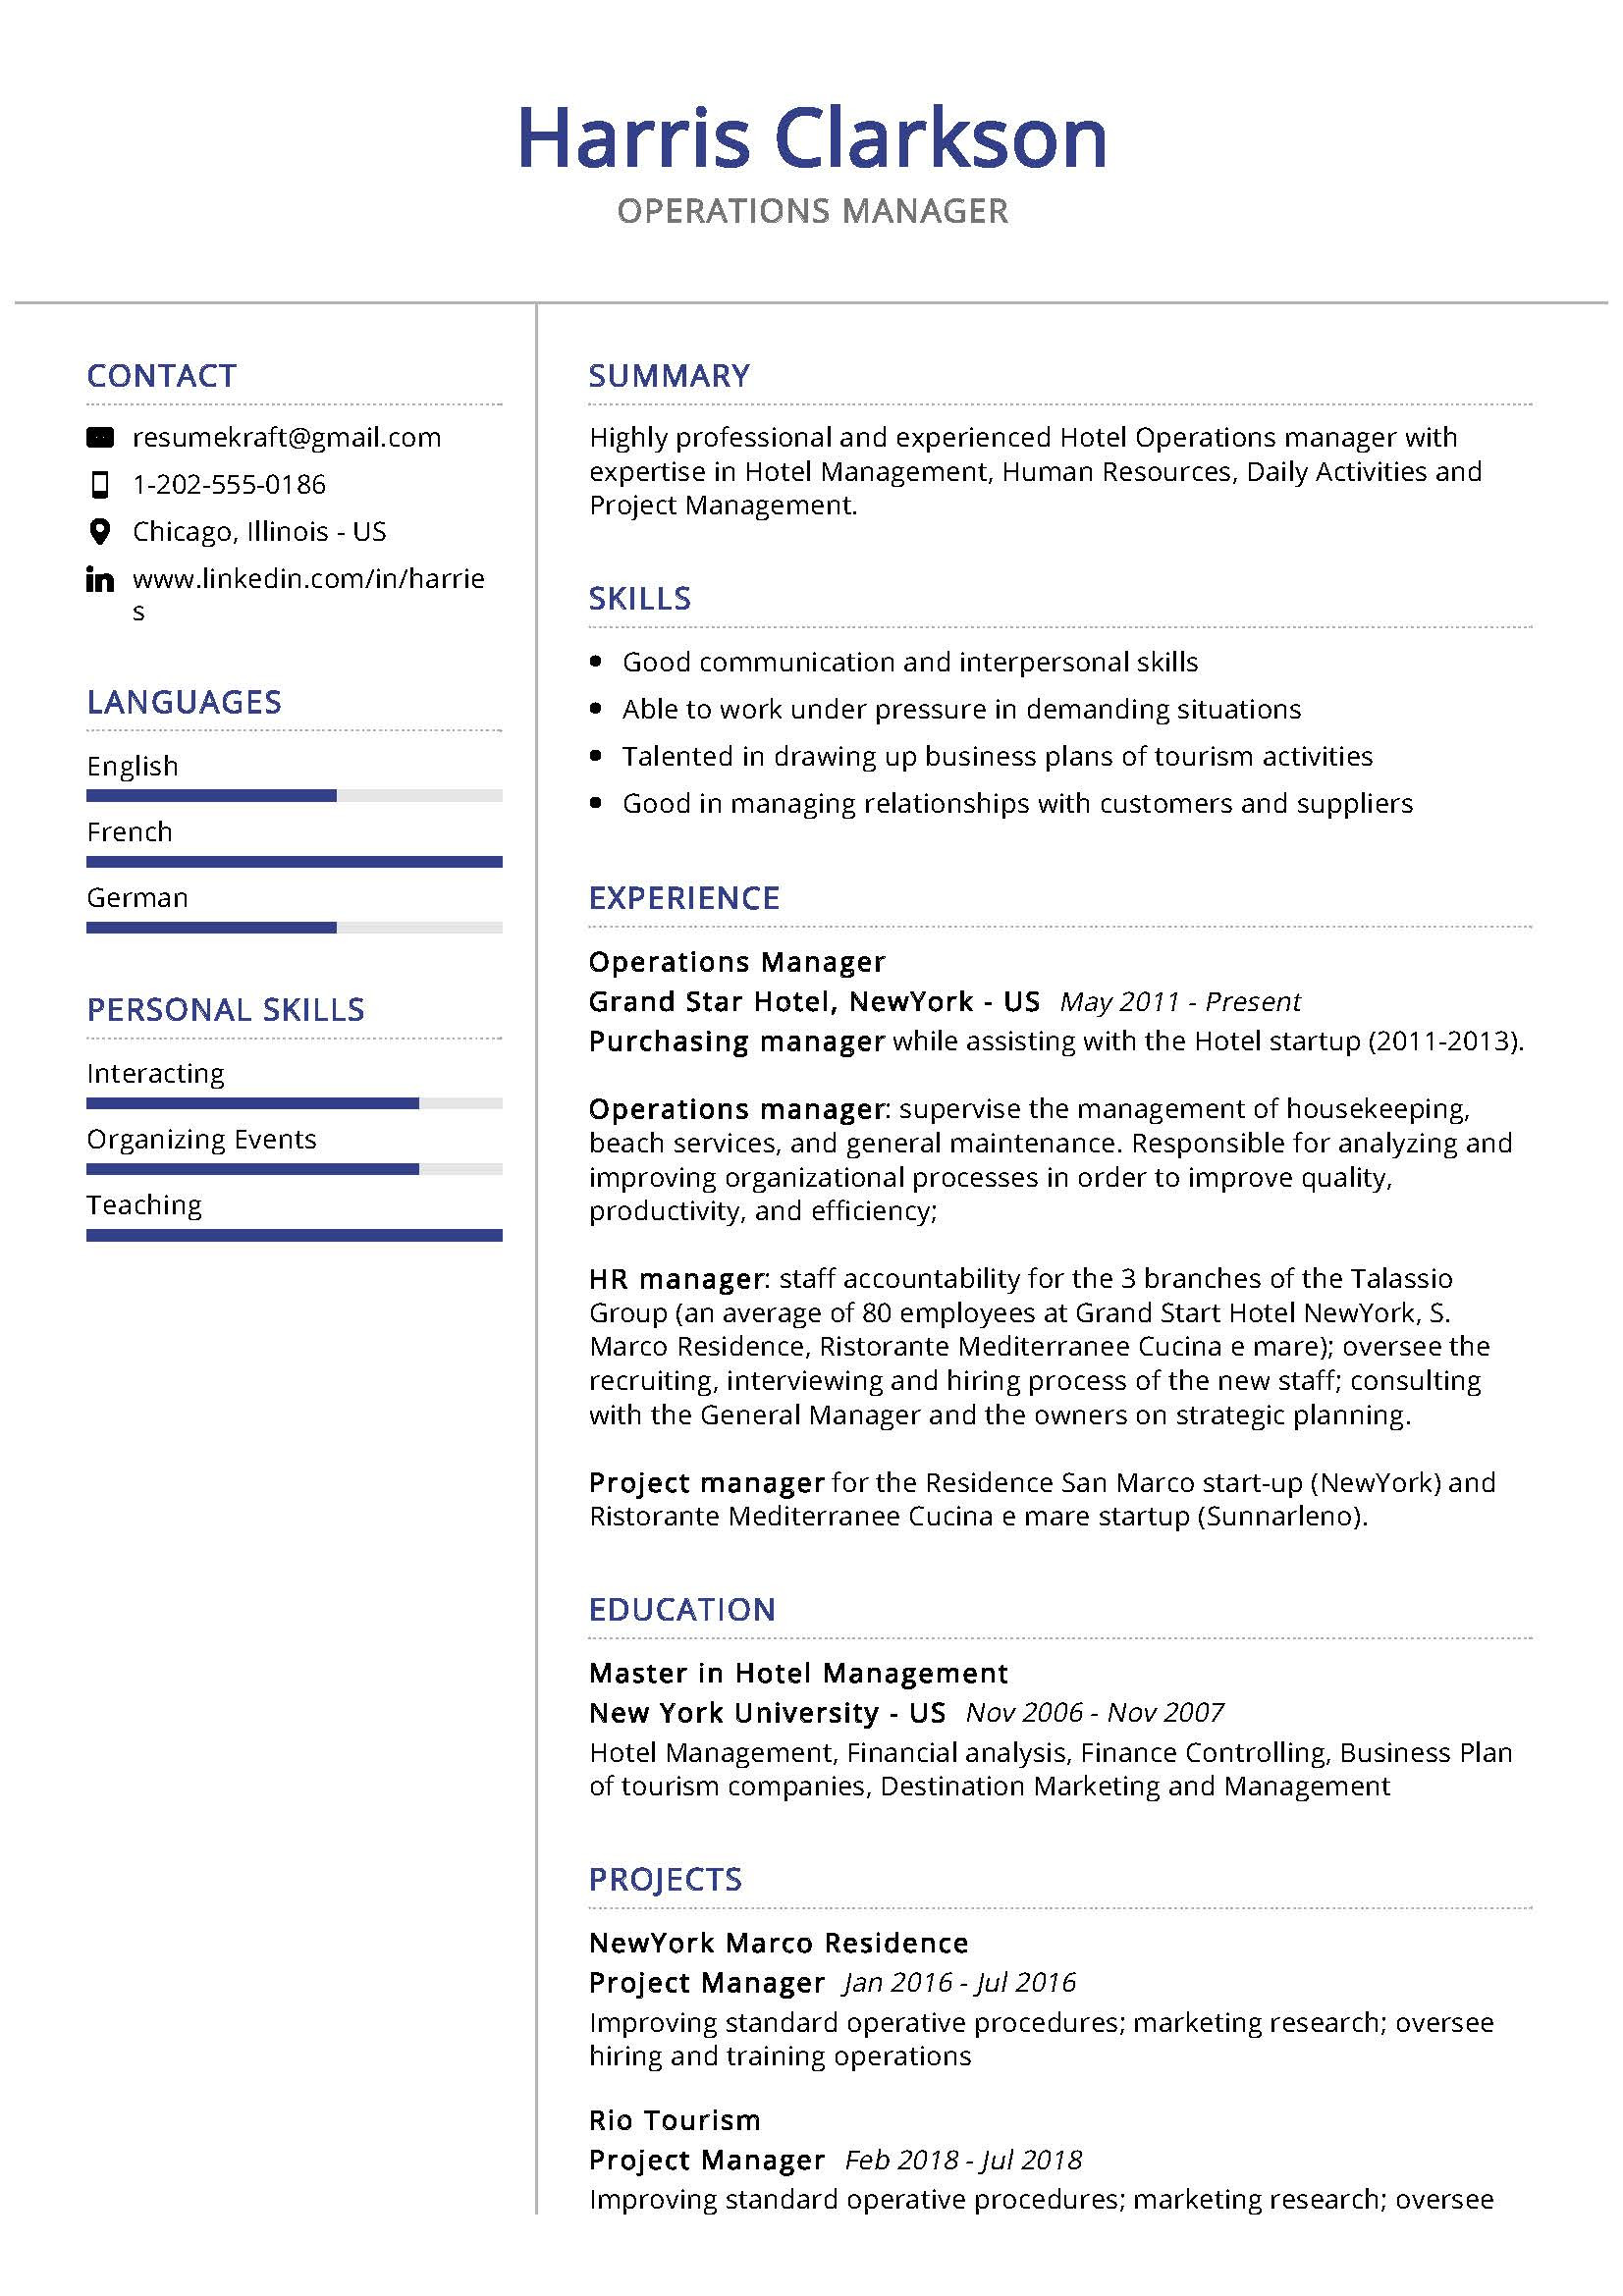 Professional Summary Resume Sample for Manager Operations Manager Resume Sample & Writing Tips 2020